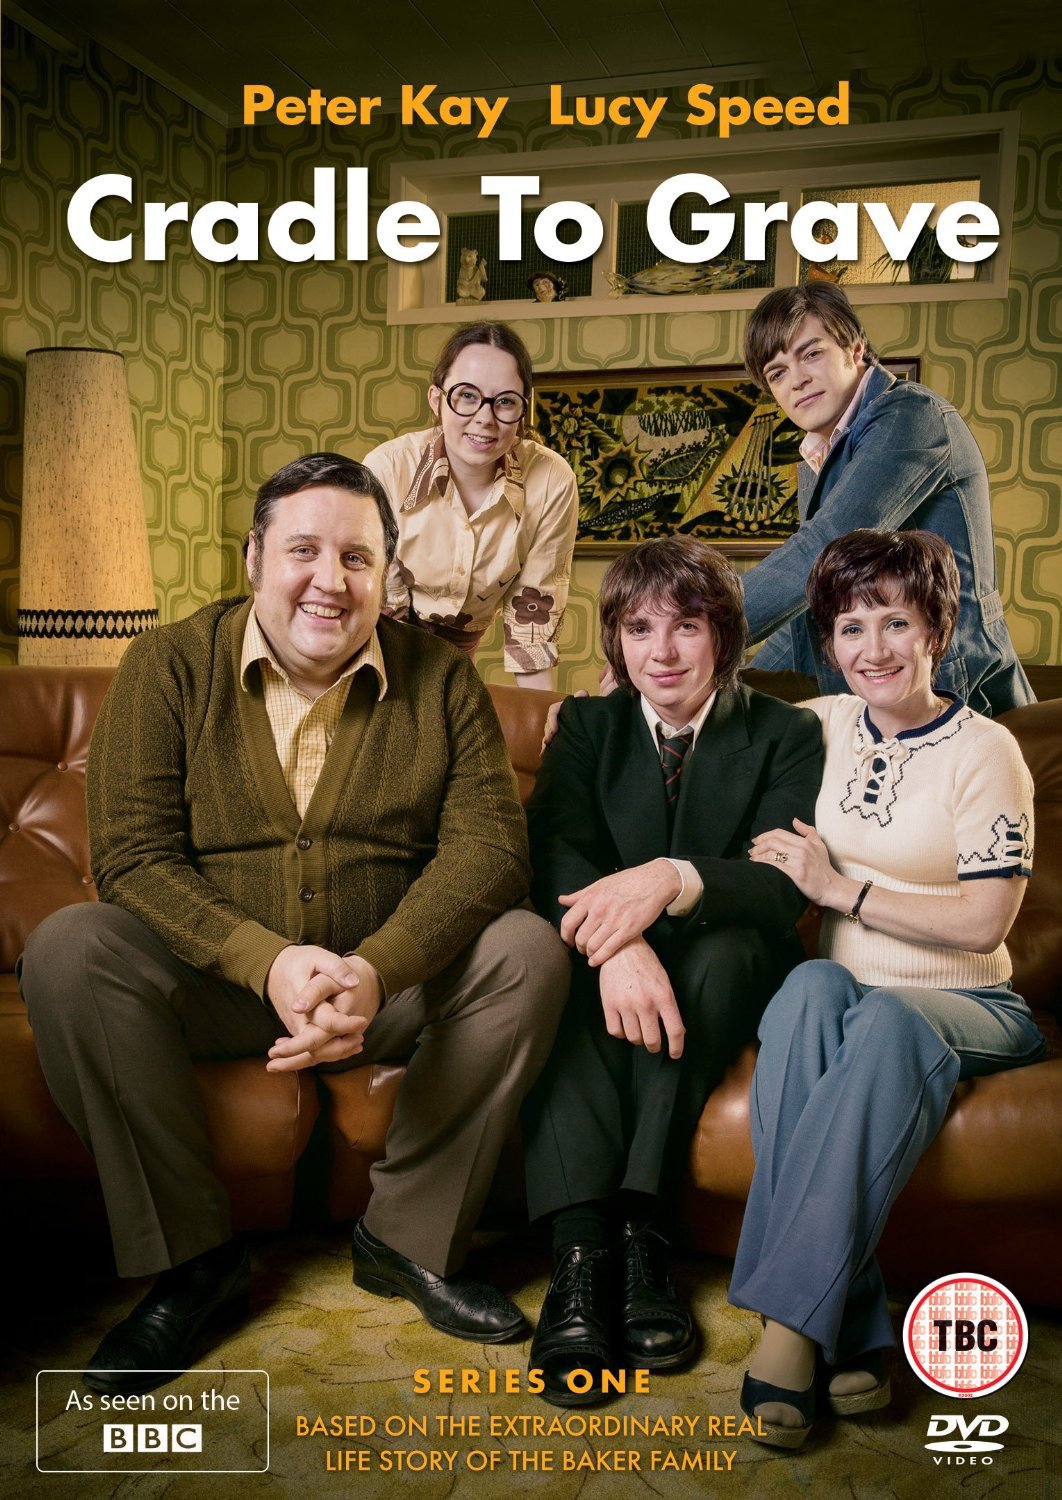 Peter Kay, Lucy Speed, Alice Sykes, Frankie Wilson and Laurie Kynaston in Cradle to Grave (2015)